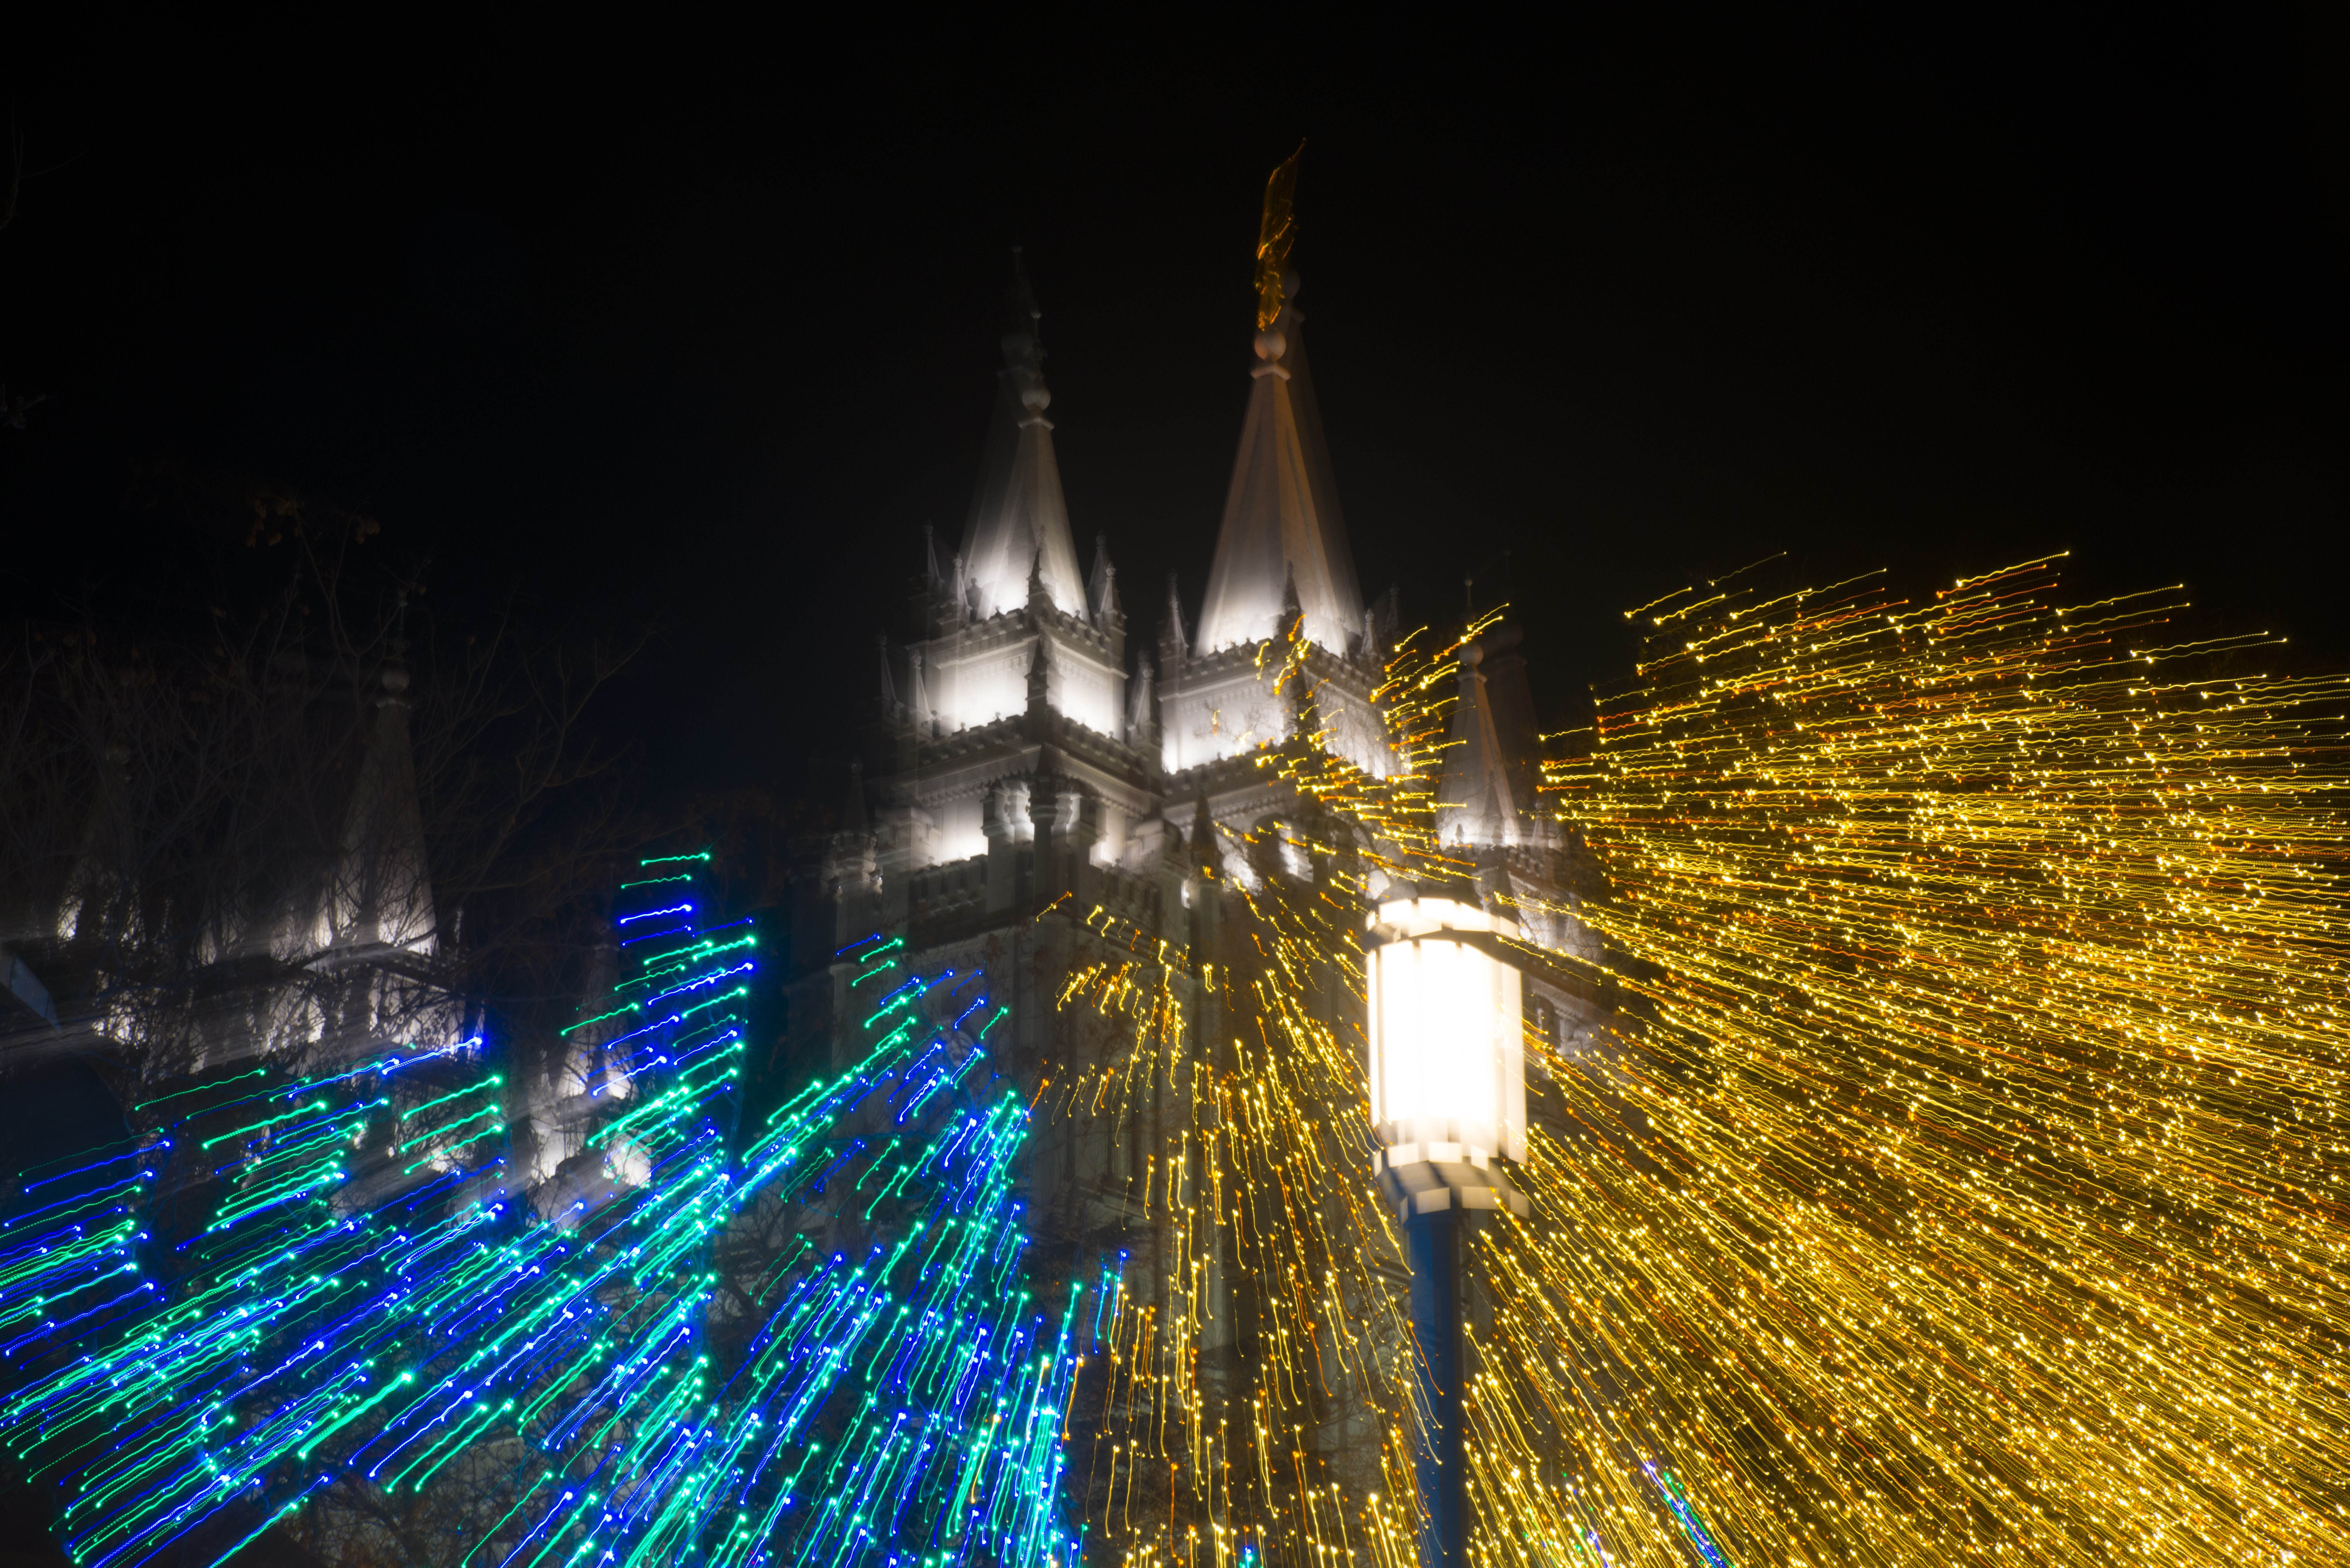 Mormon Temple Square Visitors Help 'Light the World' during the